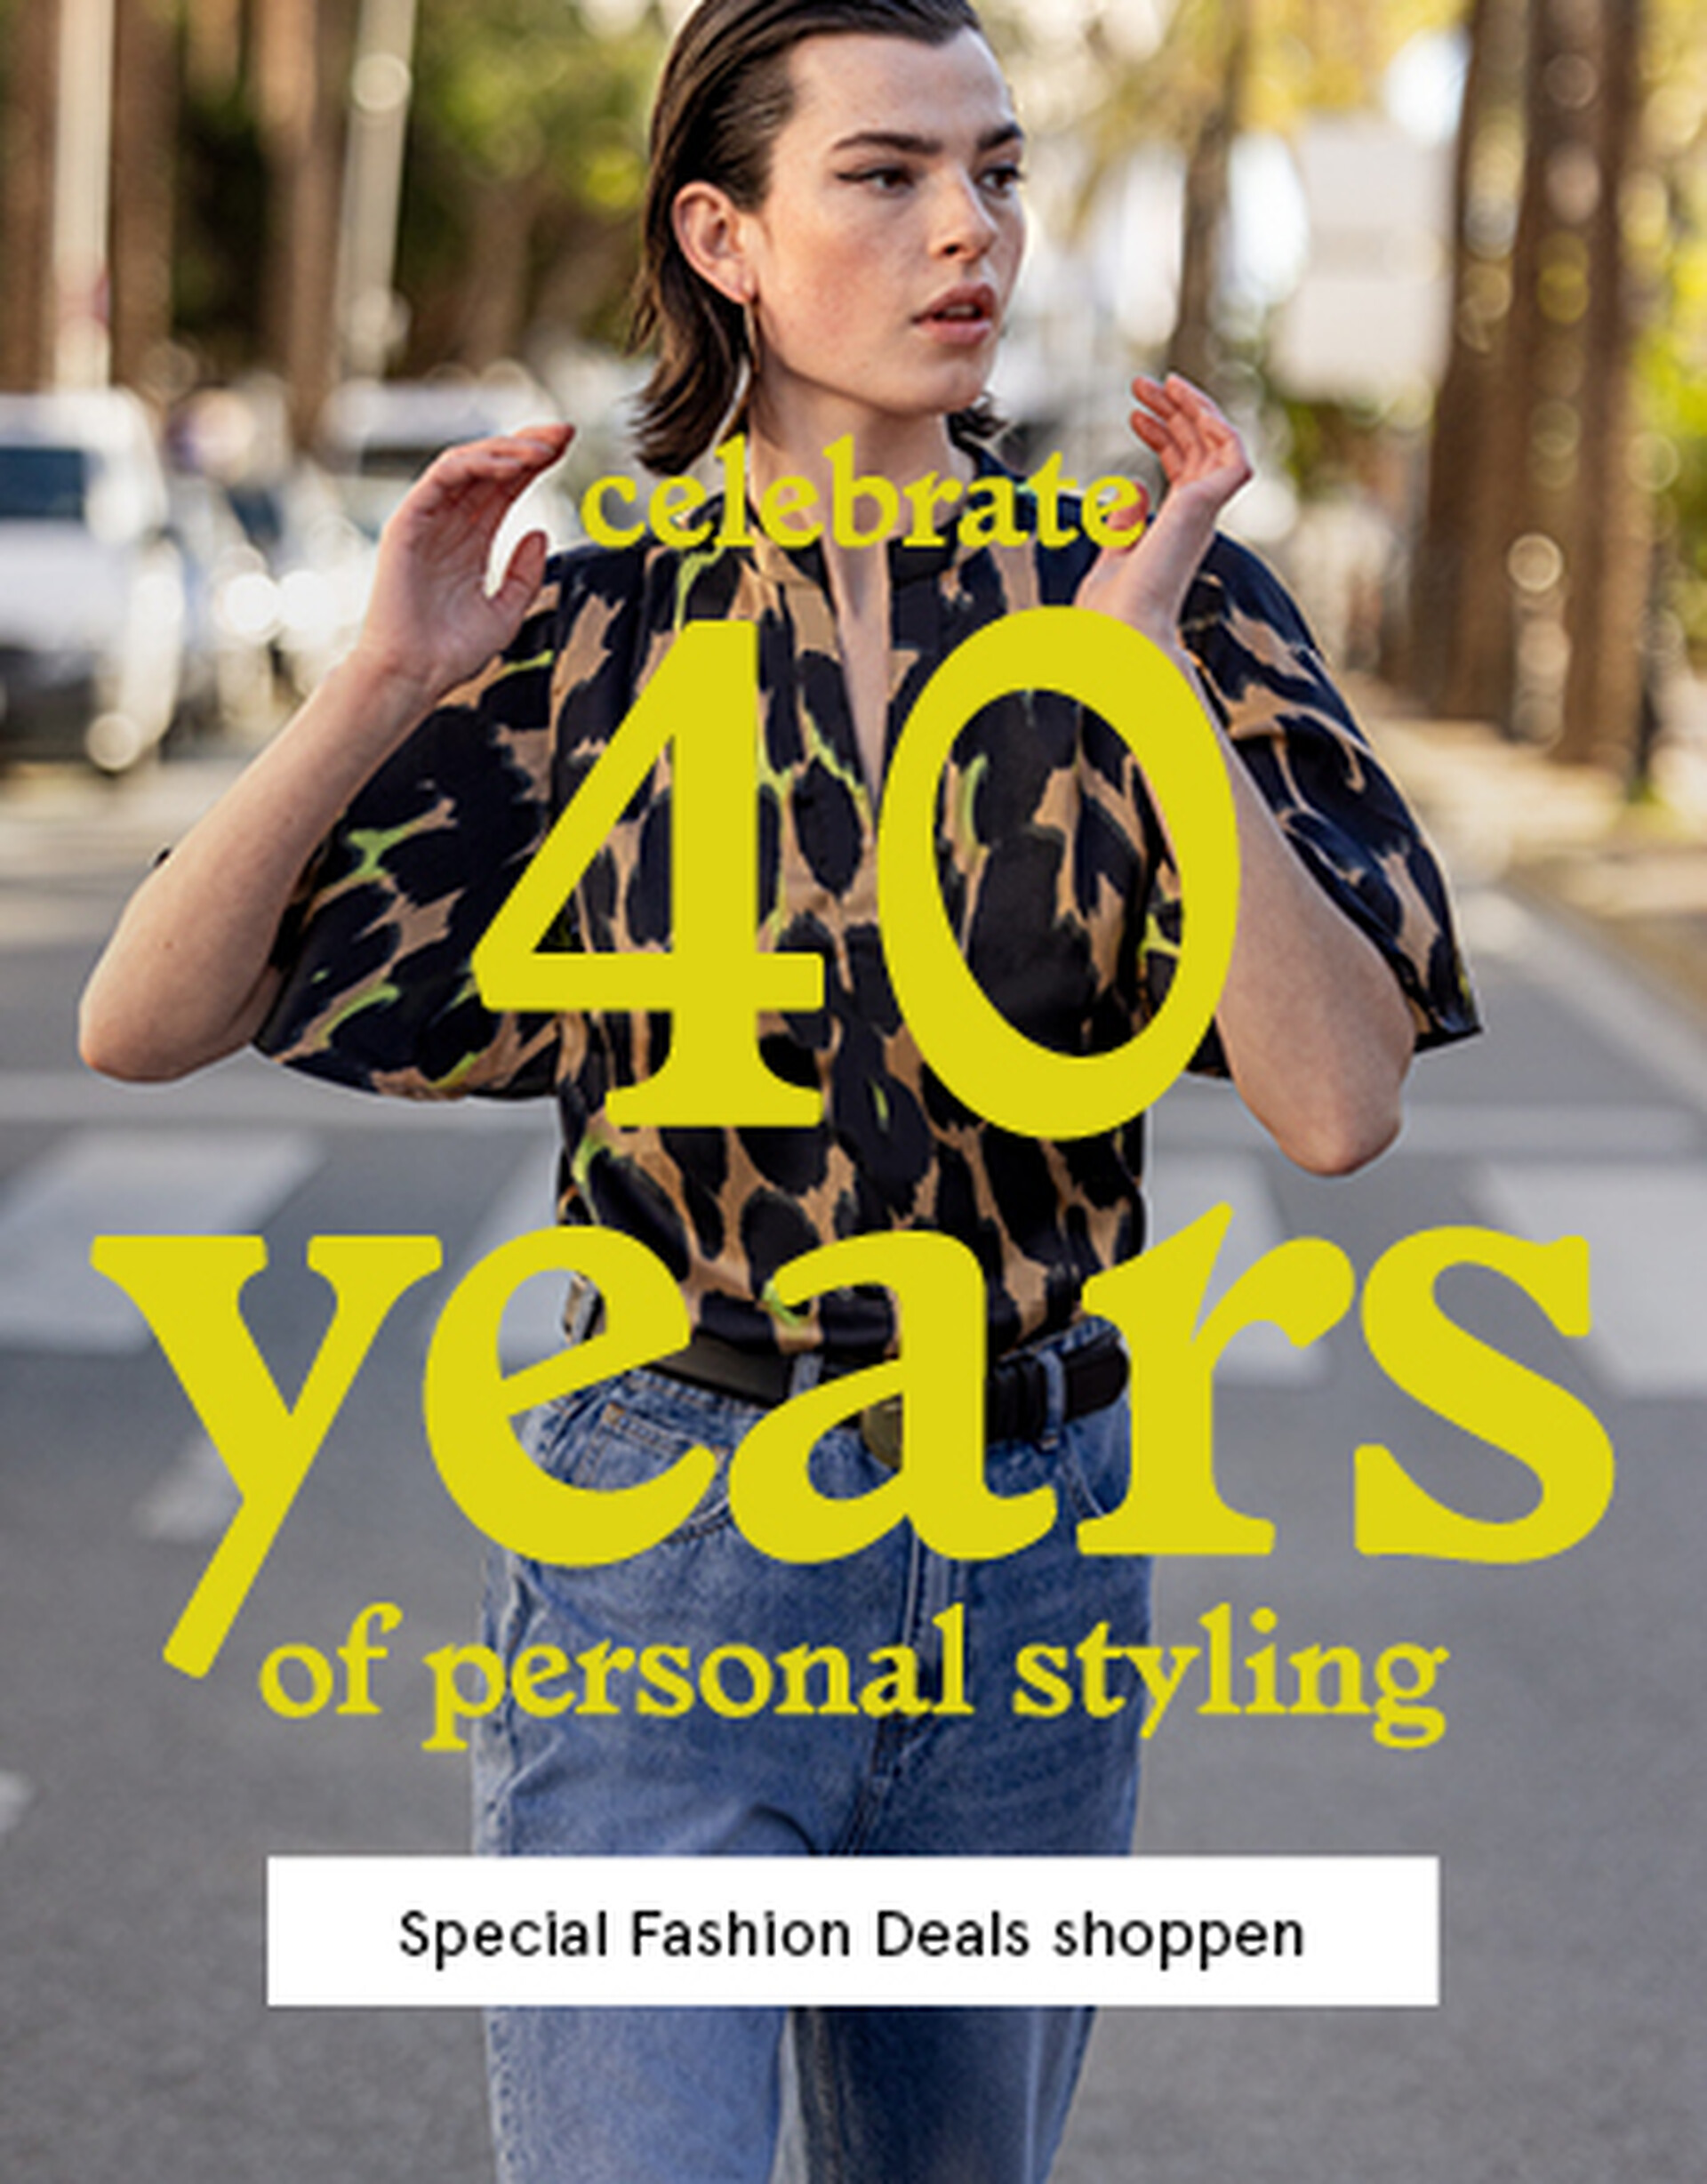 40 years of personal styling